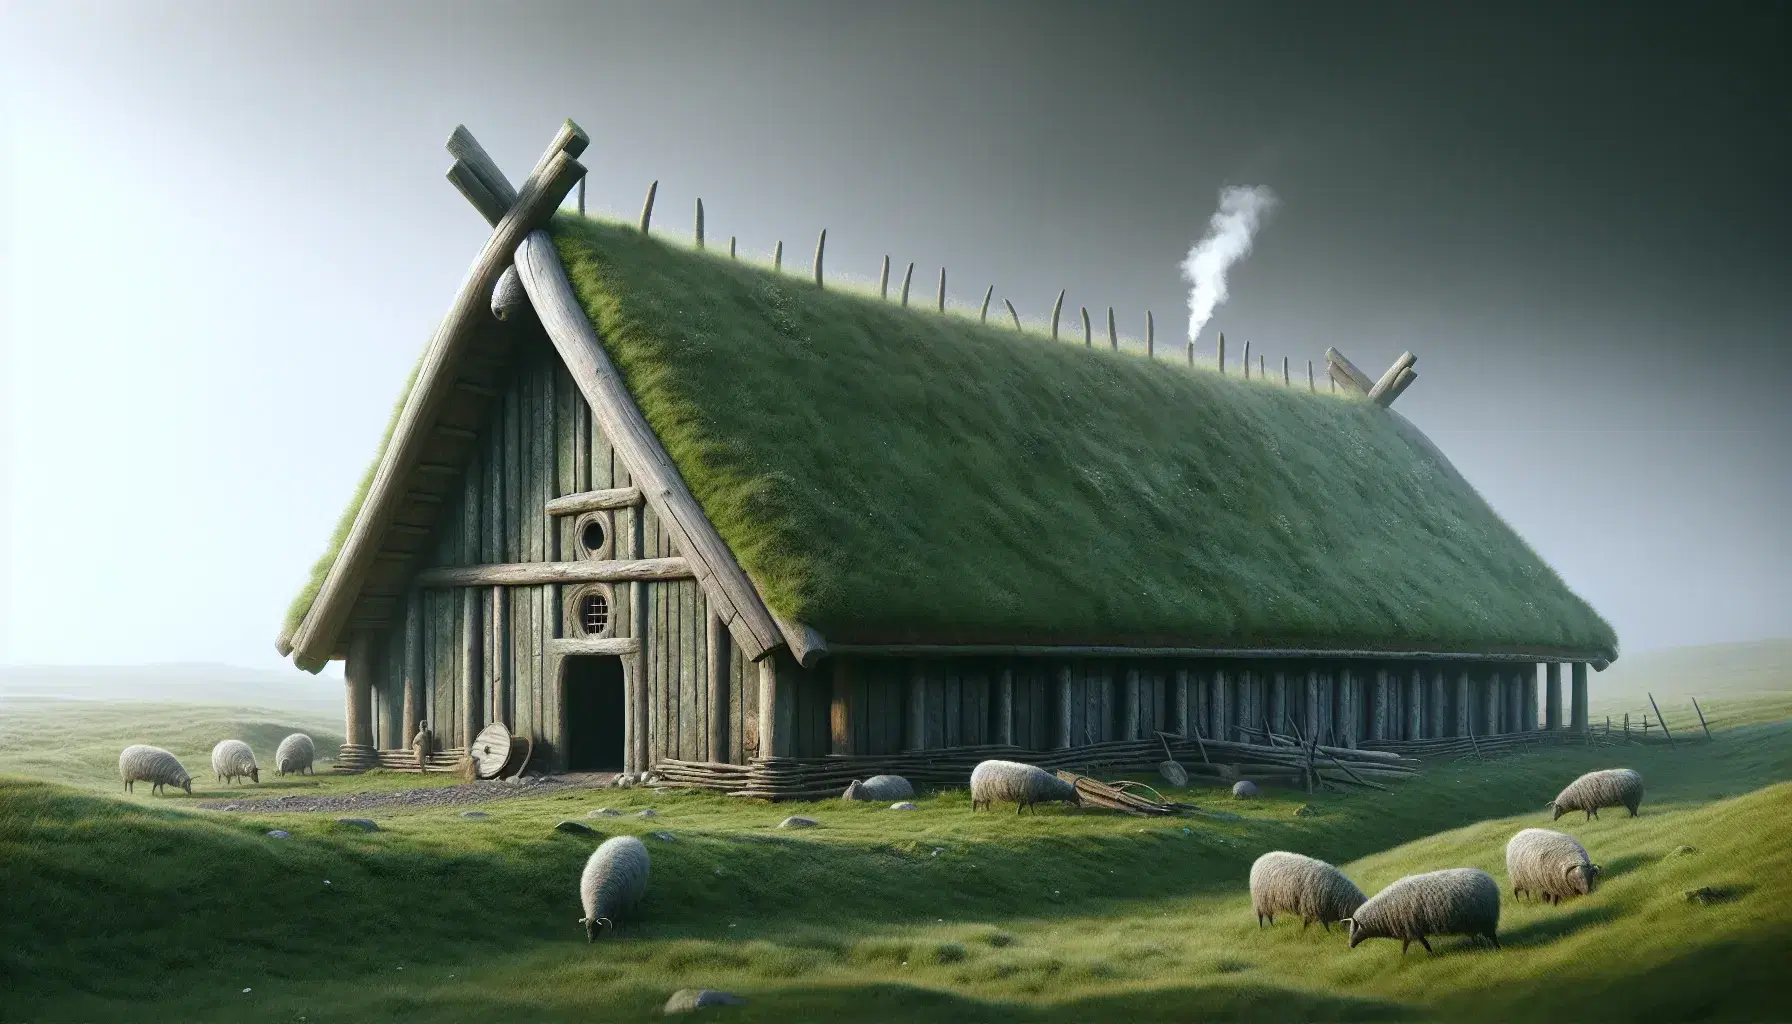 Reconstructed Viking longhouse with turf roof, wooden walls, and smoke rising from the top, surrounded by grazing sheep and people in period attire.